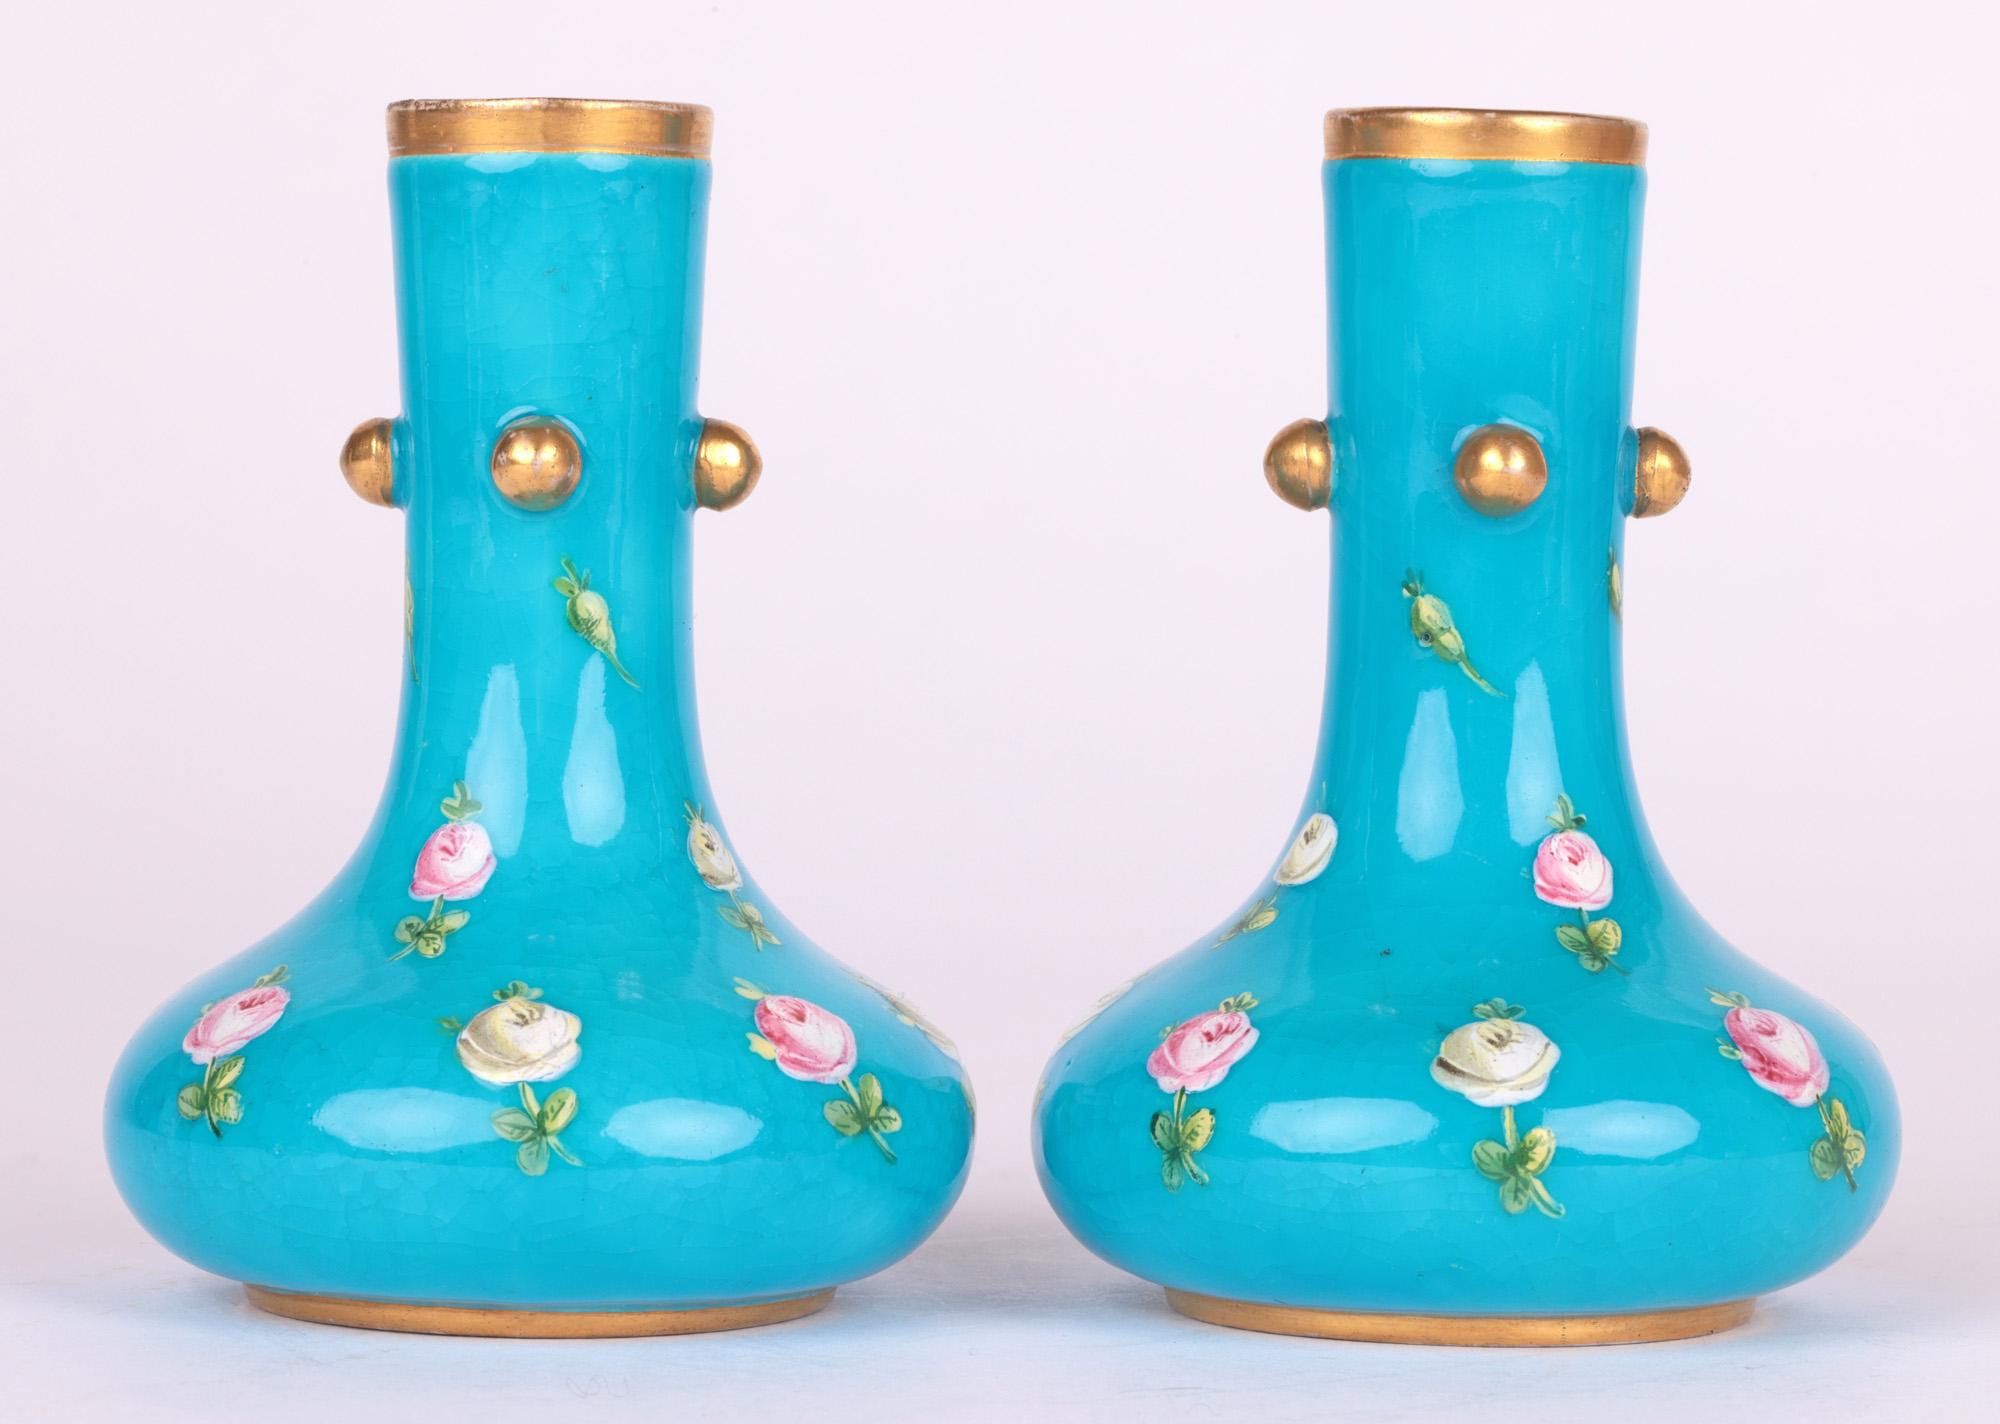 Christopher Dresser for Minton Pair Turquoise Floral Painted Vases 12